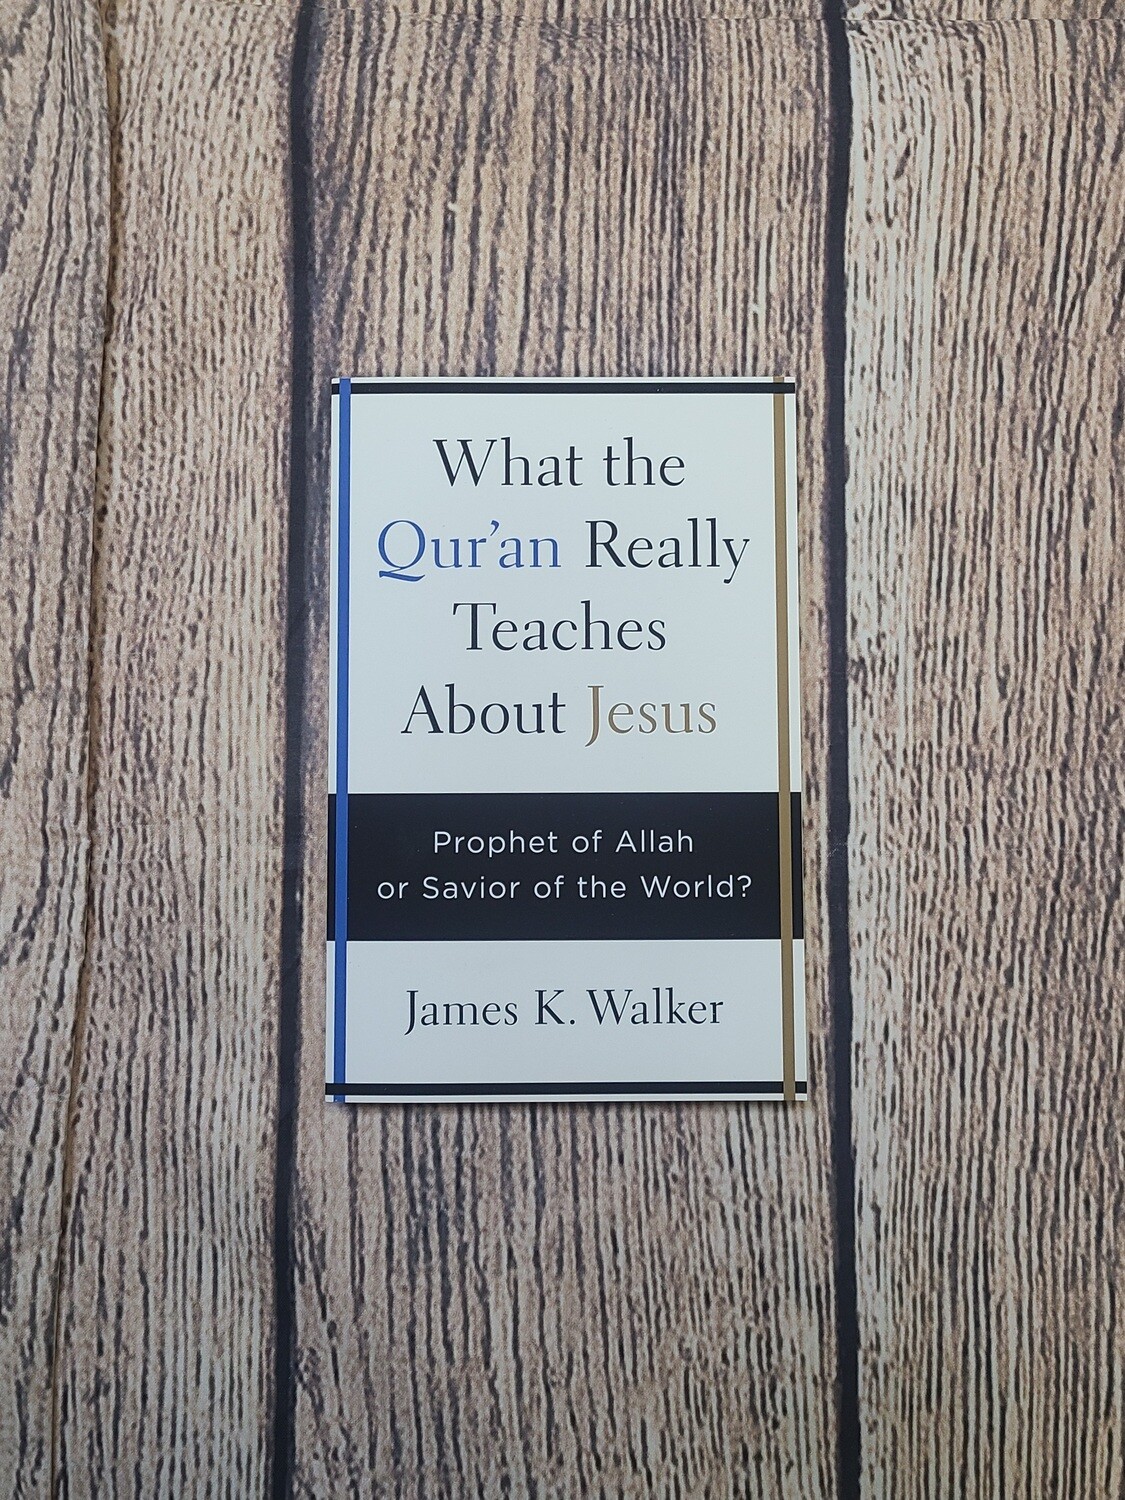 What the Qur'an Really Teaches About Jesus: Prophet of Allah or Savior of the World? by James K. Walker